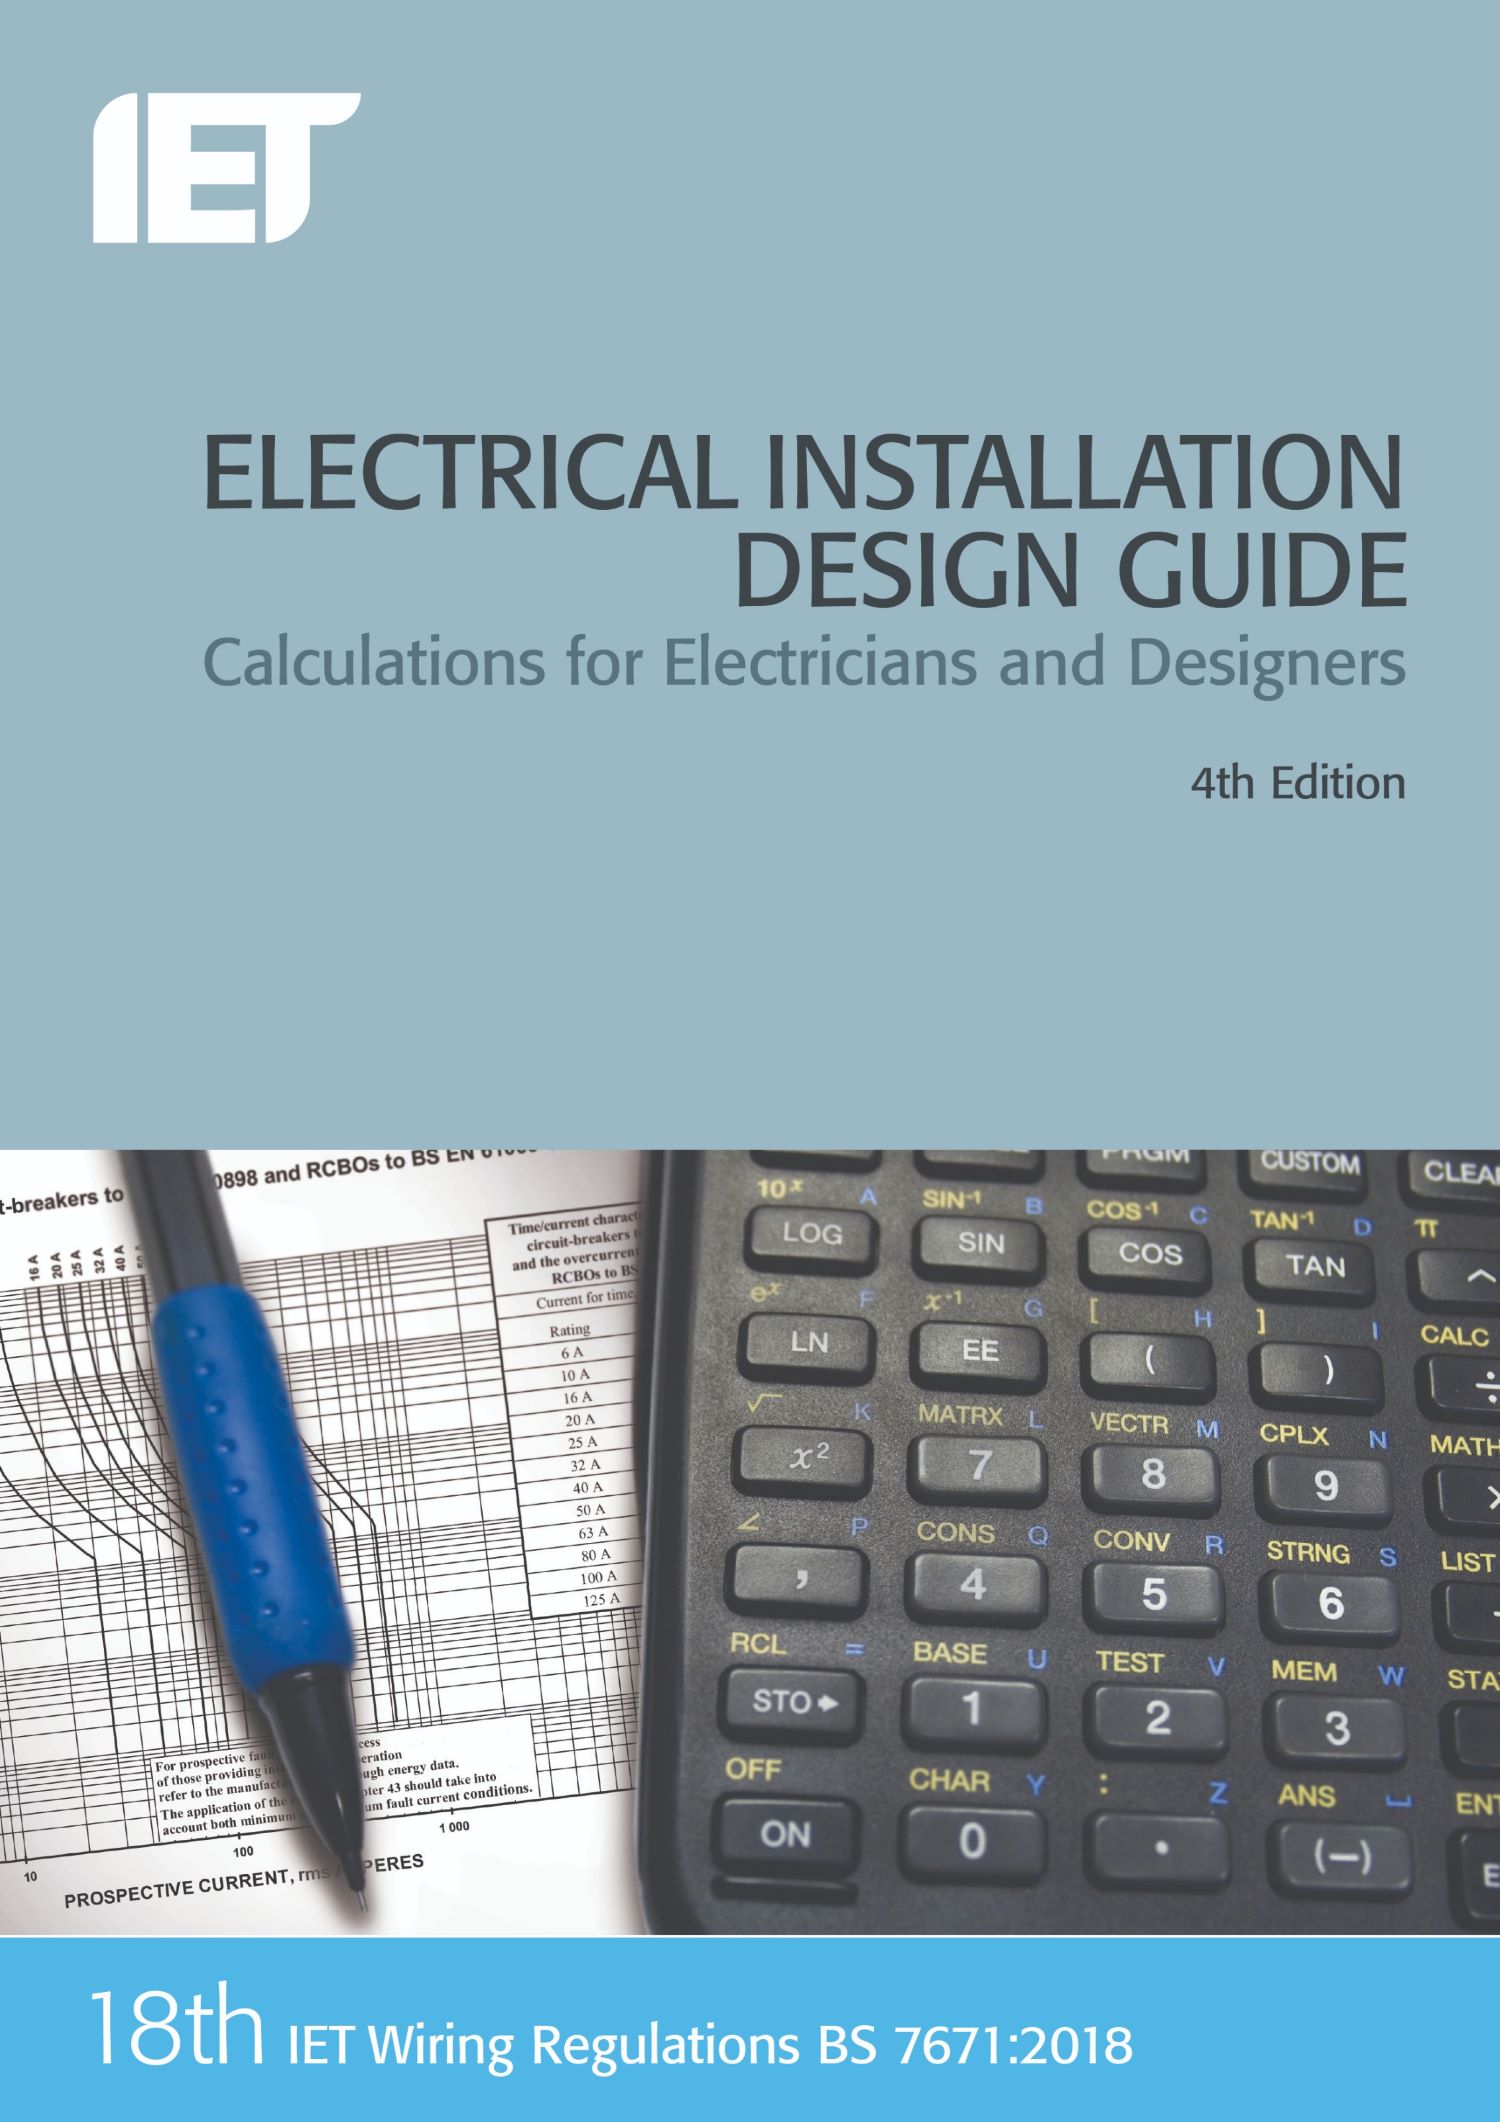 IET Electrical Installation Design Guide Calculations